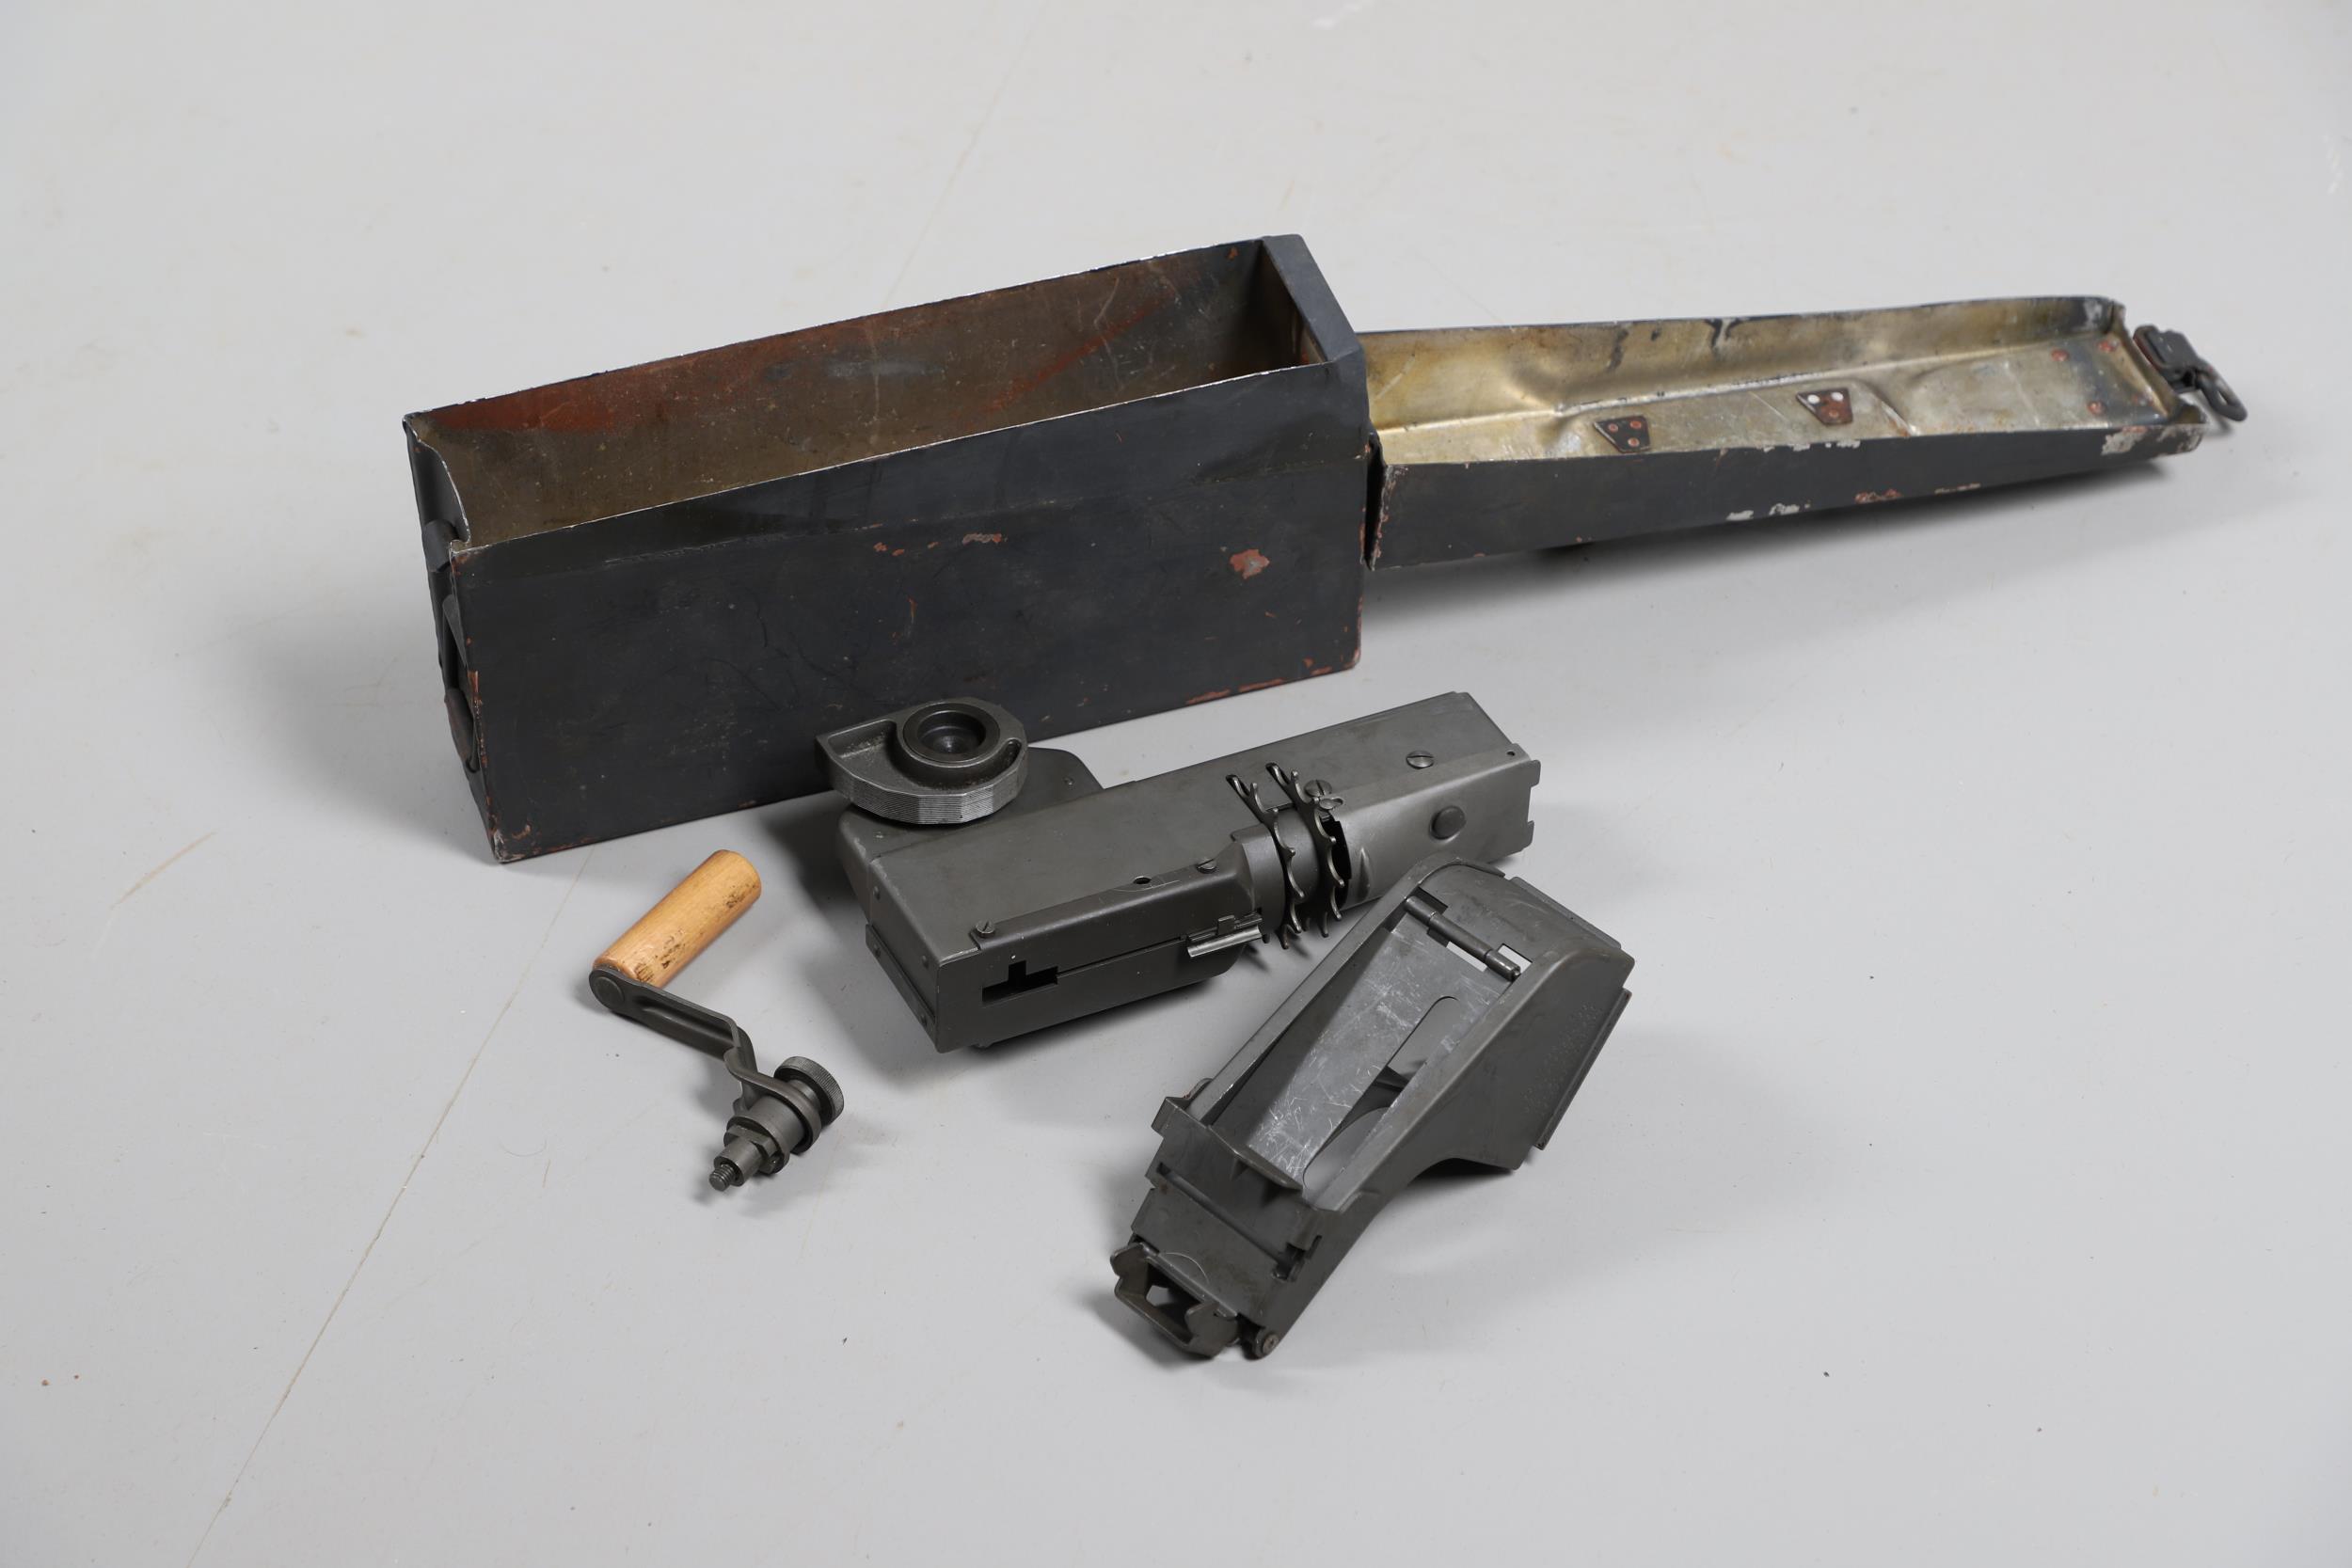 A 42/59 MACHINE GUN BELT LOADER AND ANOTHER SIMILAR. - Image 8 of 14